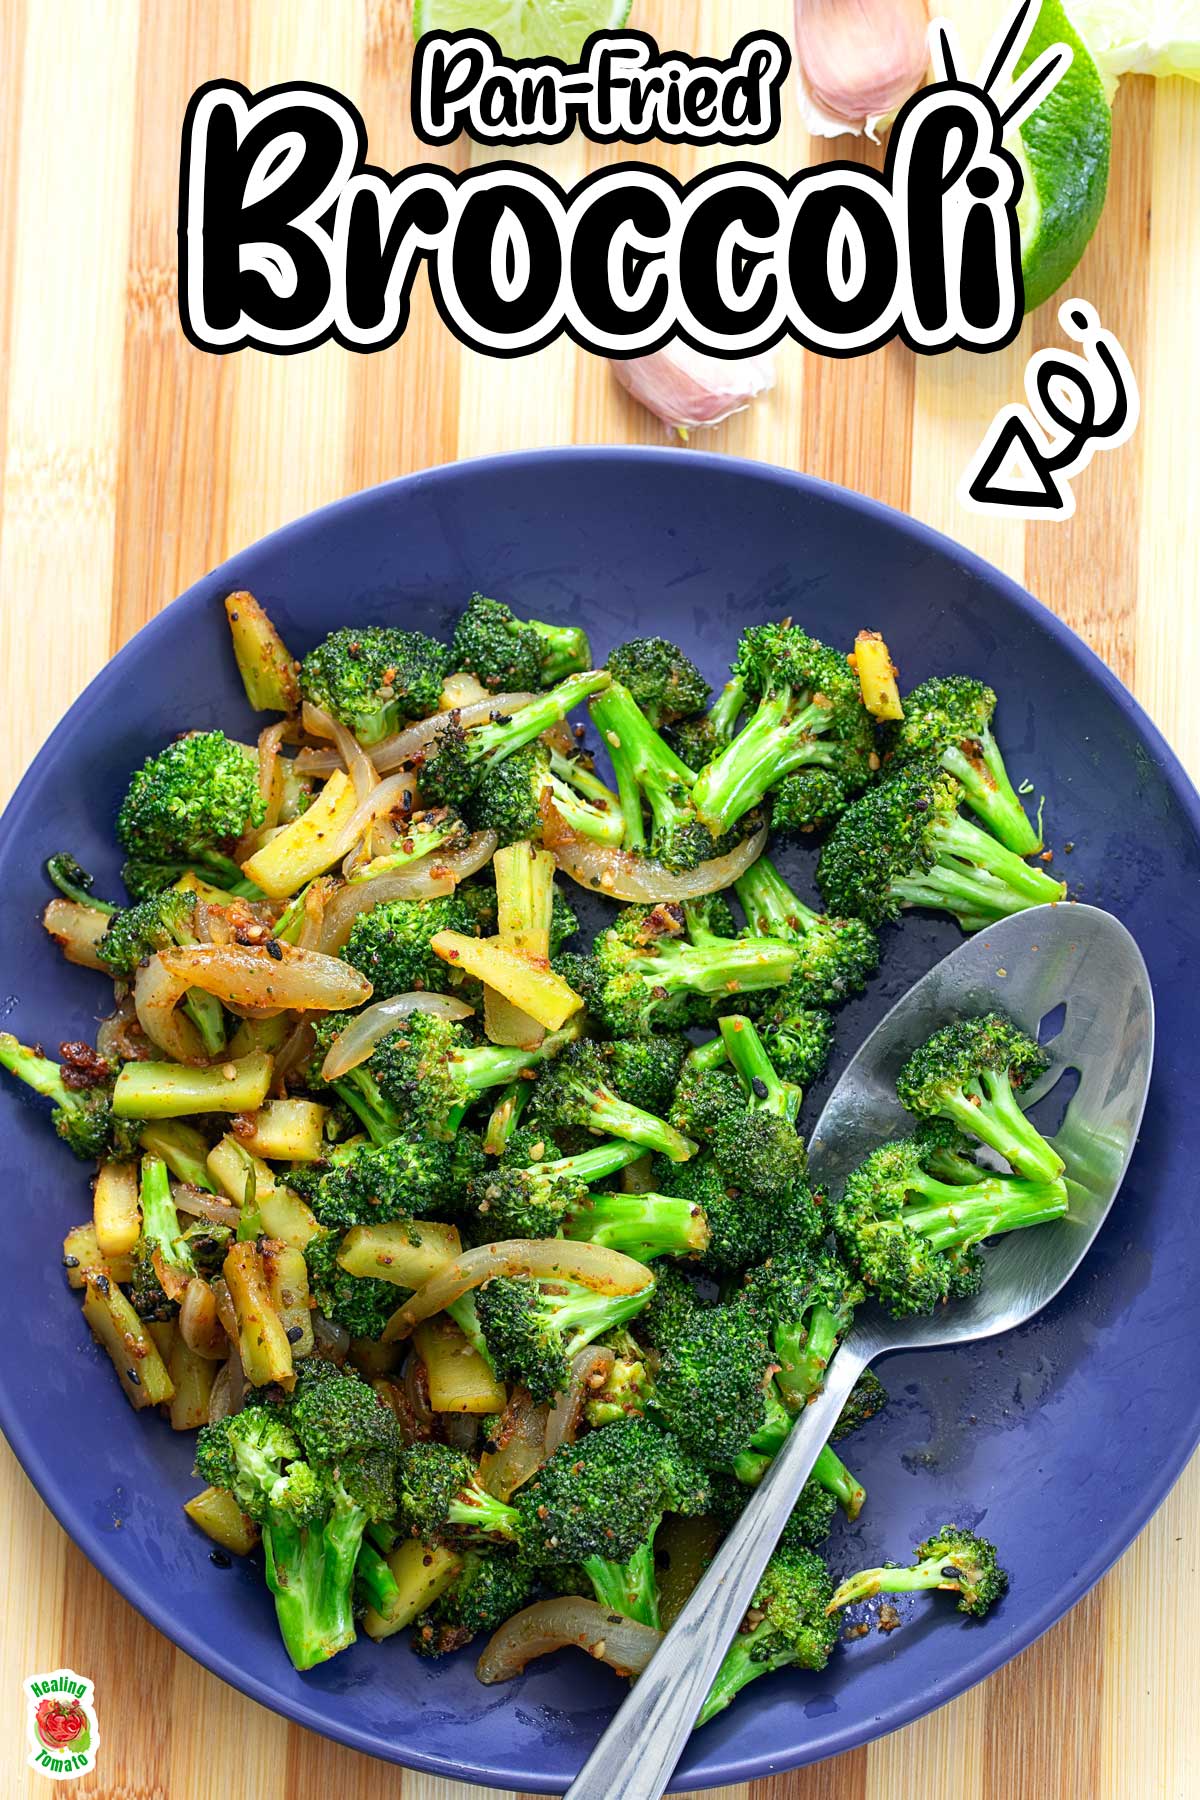 Top and closeup view of cooked broccoli and onions on a blue plate with a steel serving spoon